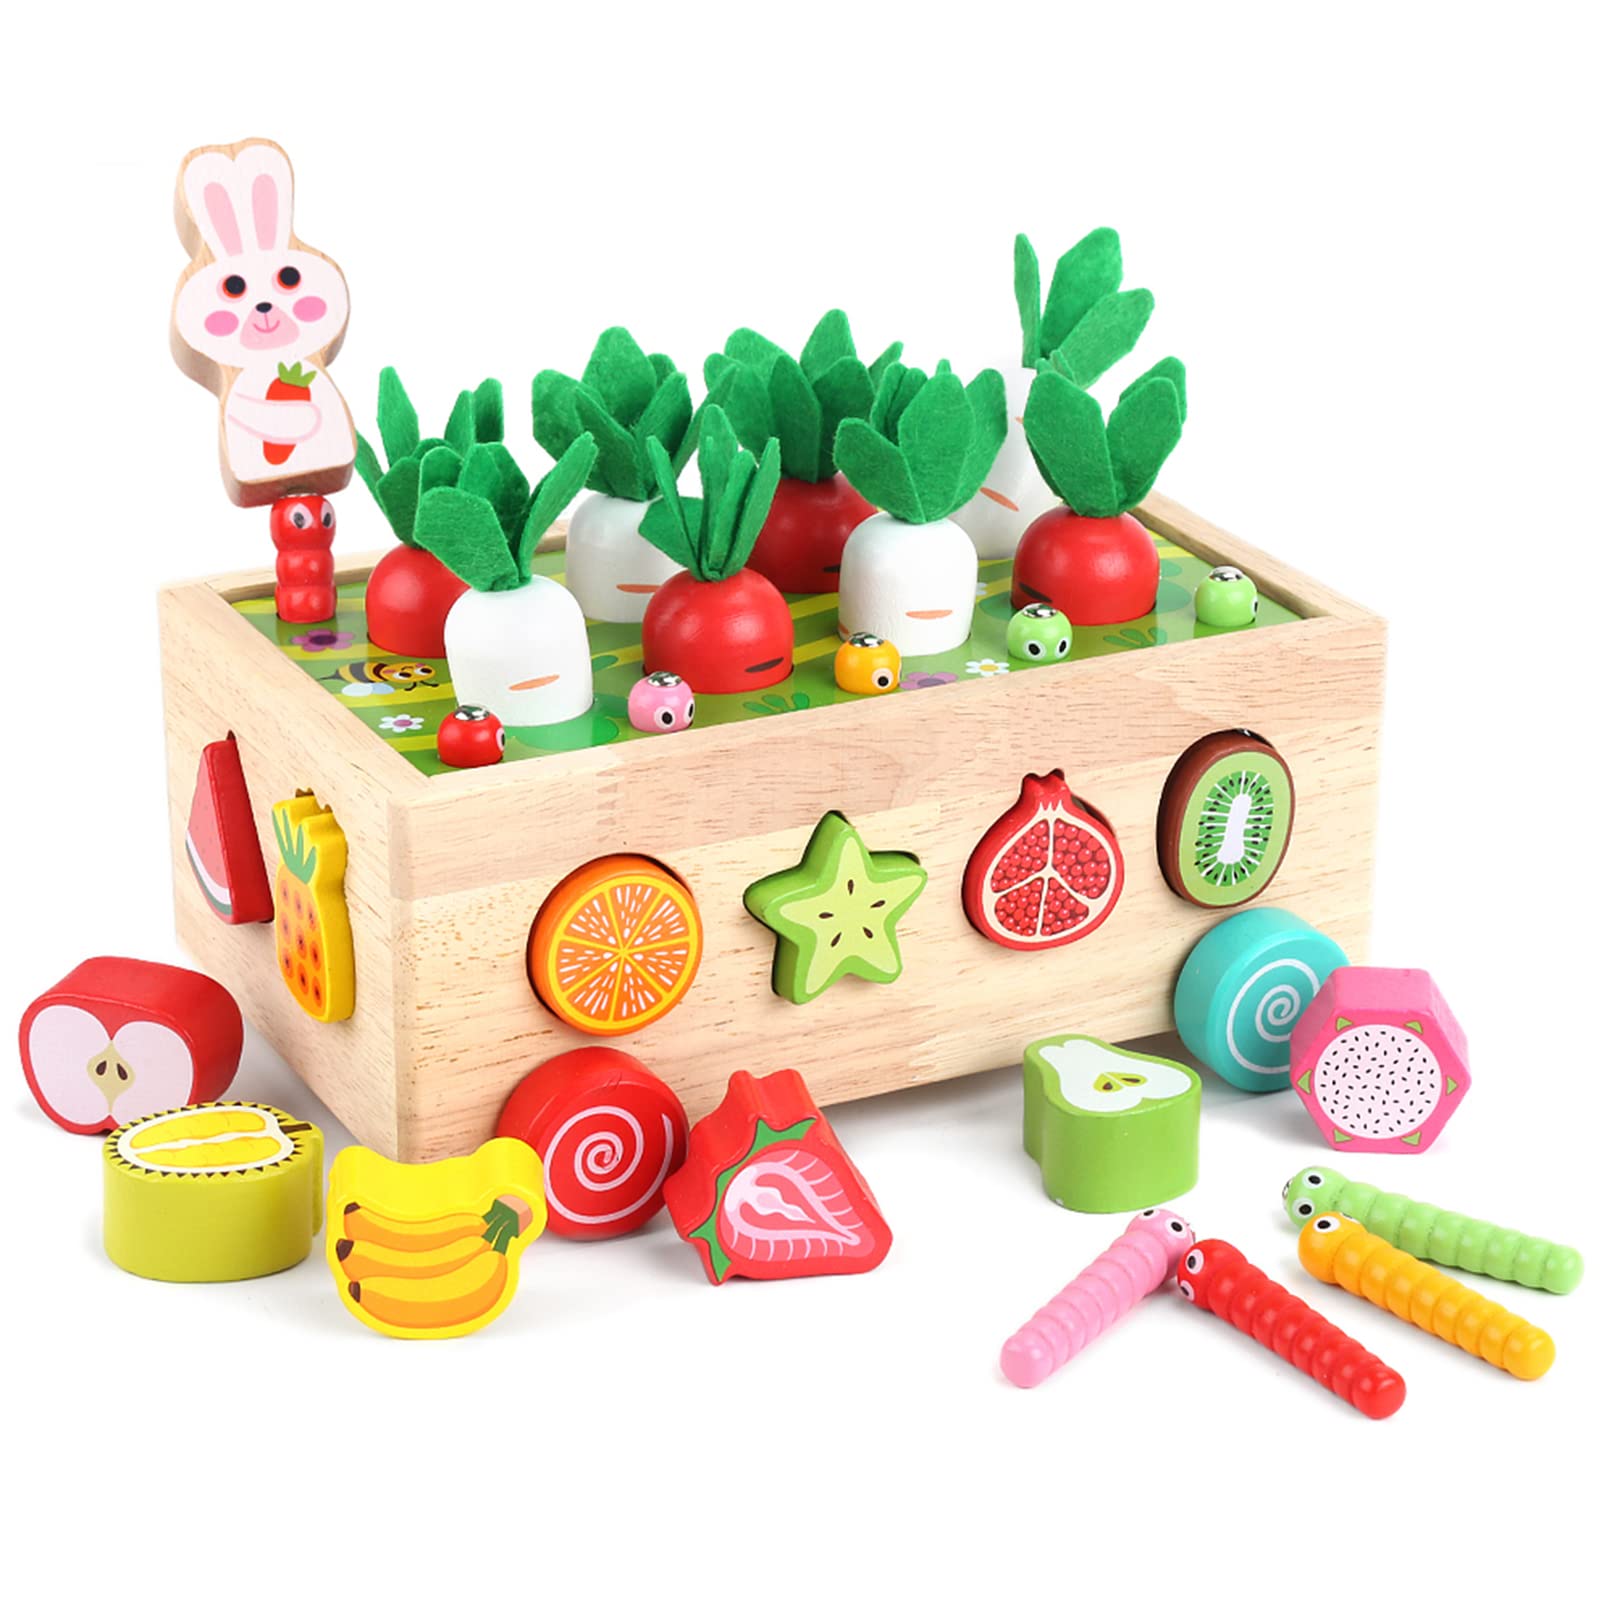 Montessori Wooden Educational Toys for Baby Boys Girls Age 2 3 4 Year Old